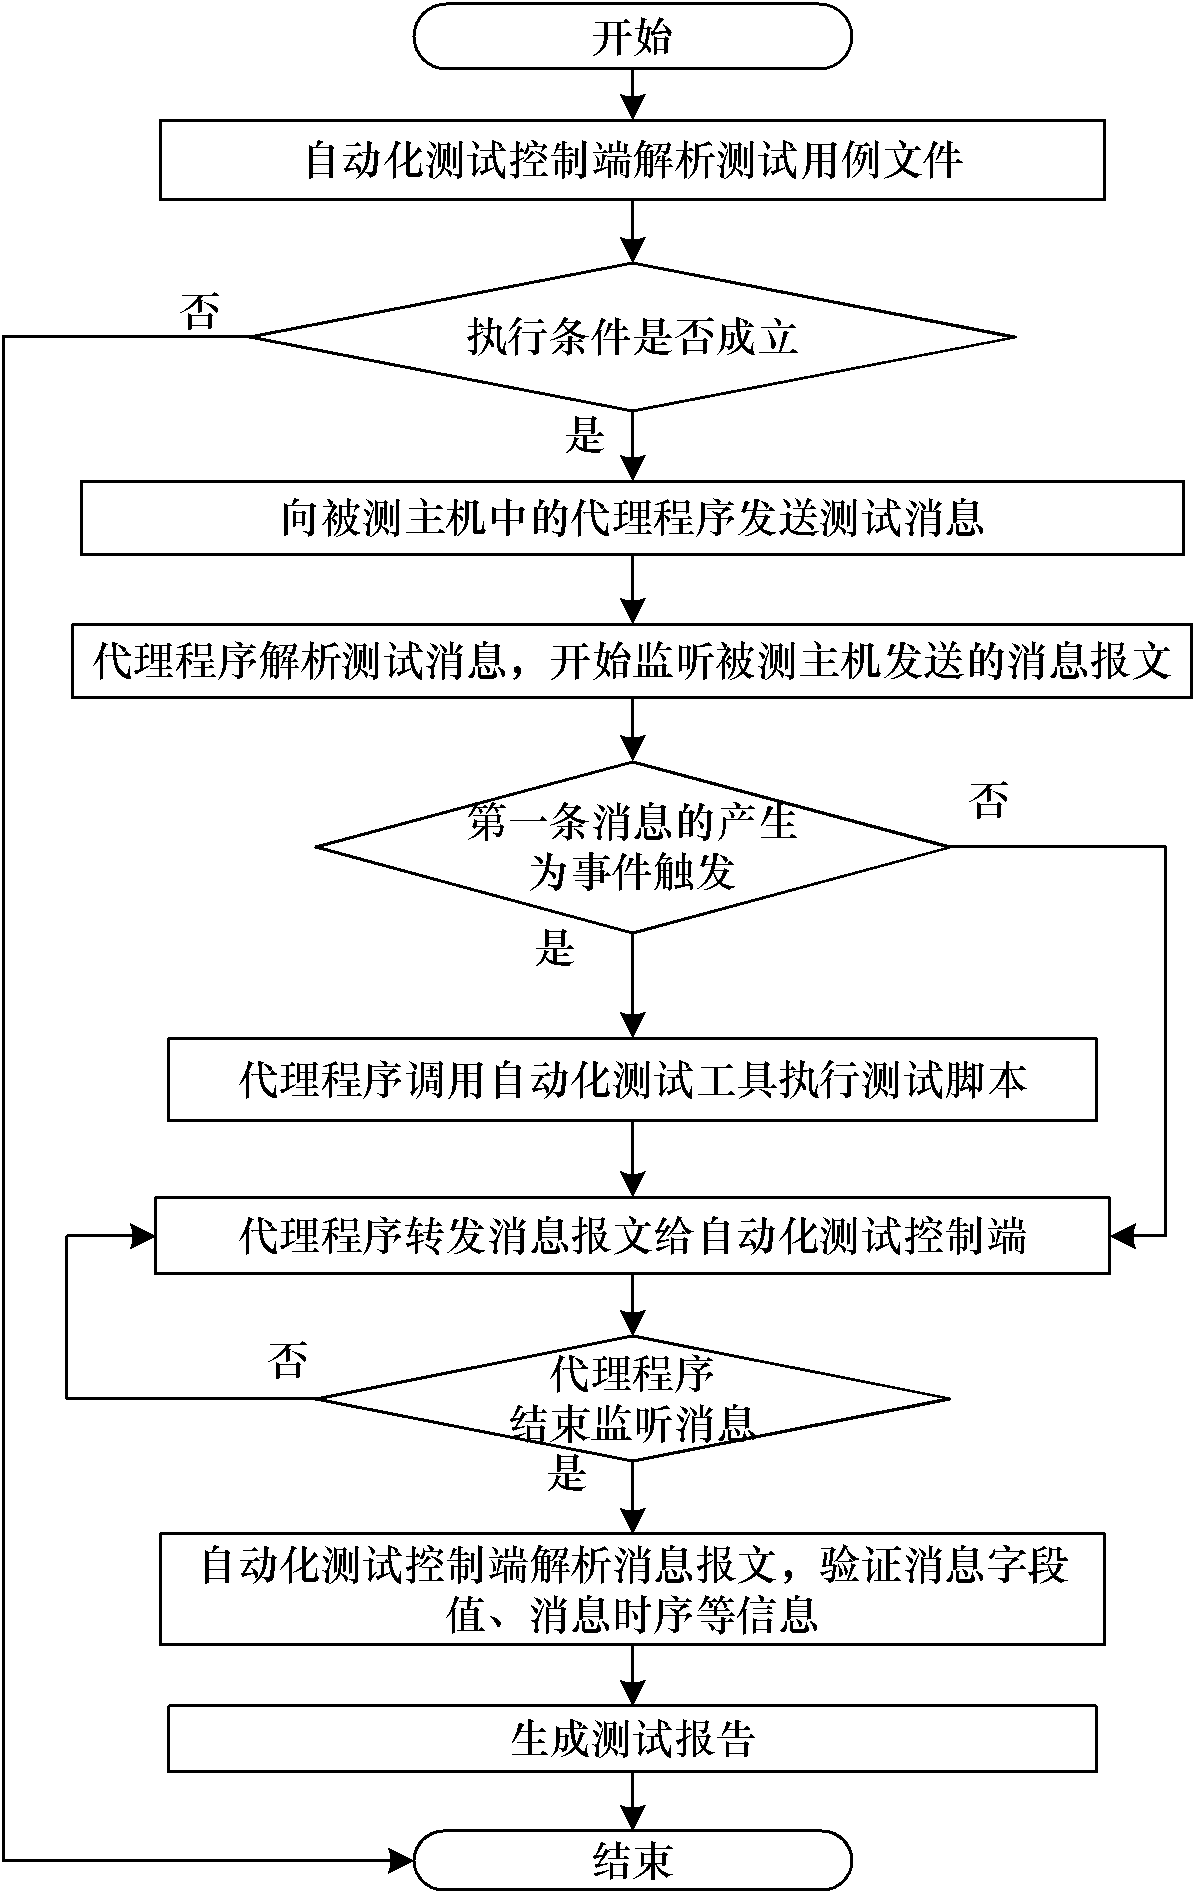 Automated testing method for distributed information system interface